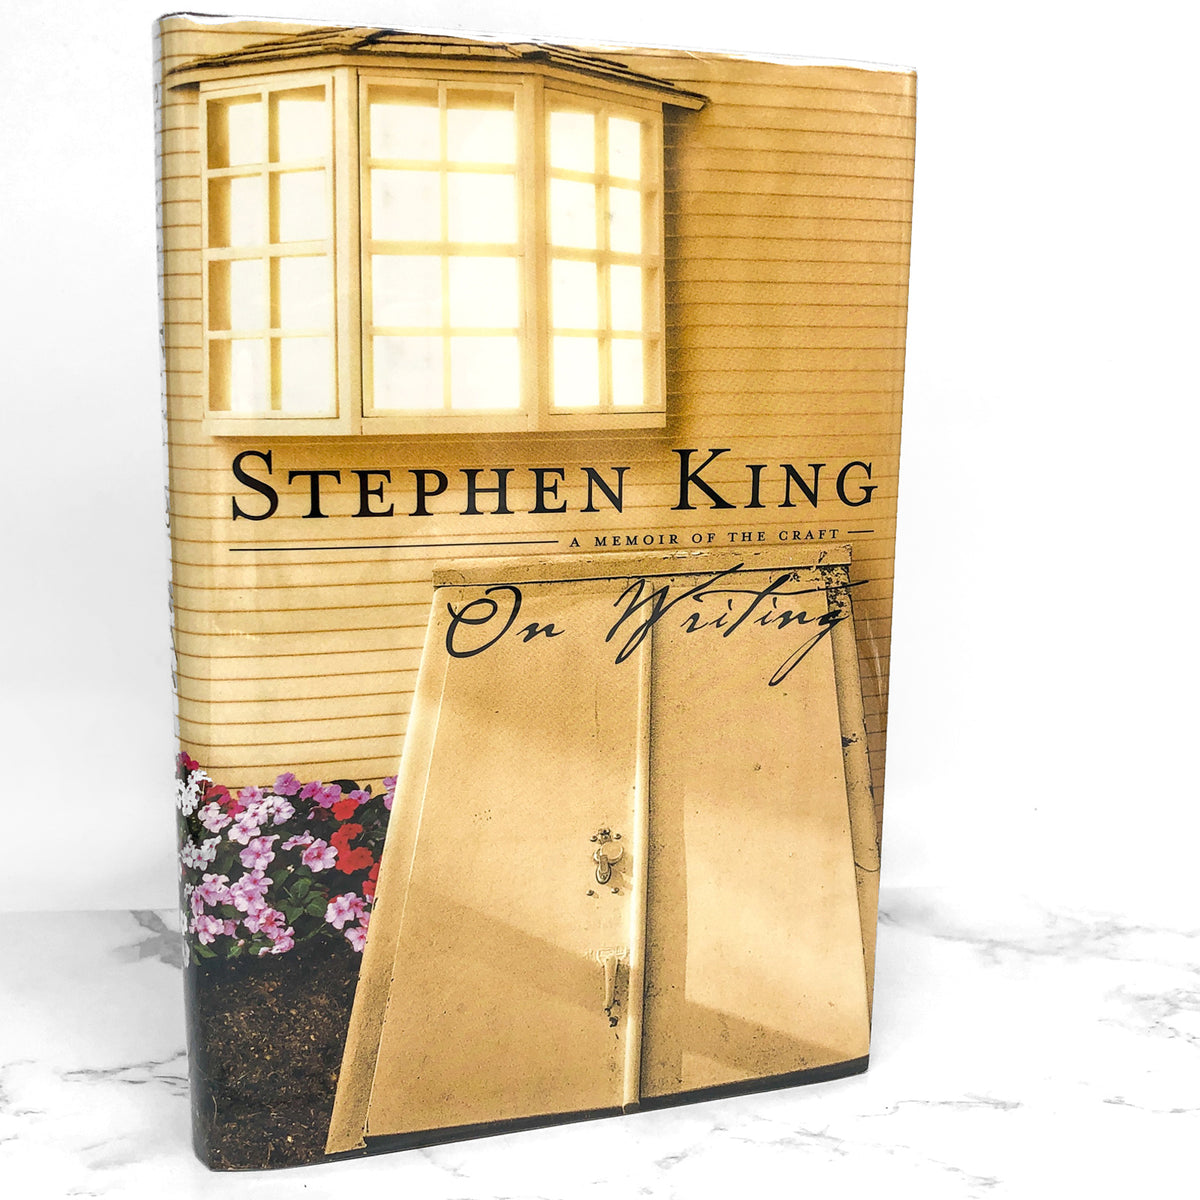 [FIRST　Stephen　A　Craft　King　by　Memoir　the　of　Writing:　•　FIR　On　EDITION